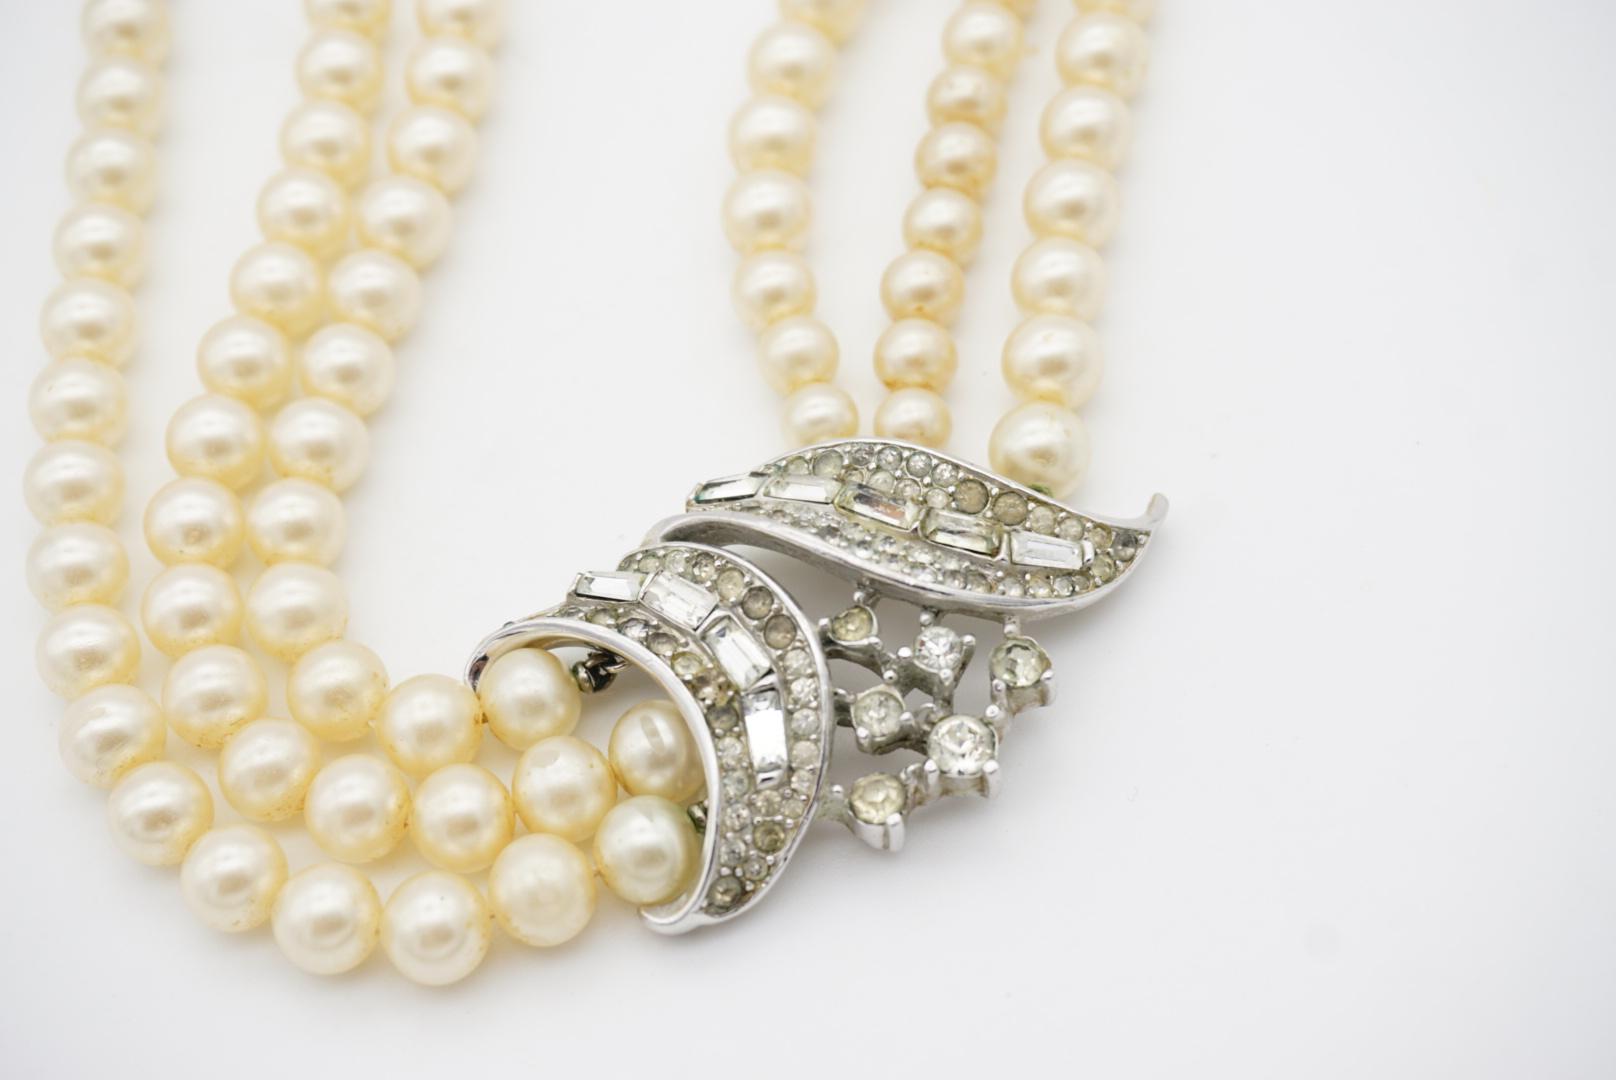 Crown Trifari 1940s Trio Strands Layer Pearls Crystals Pendant Choker Necklace For Sale 8